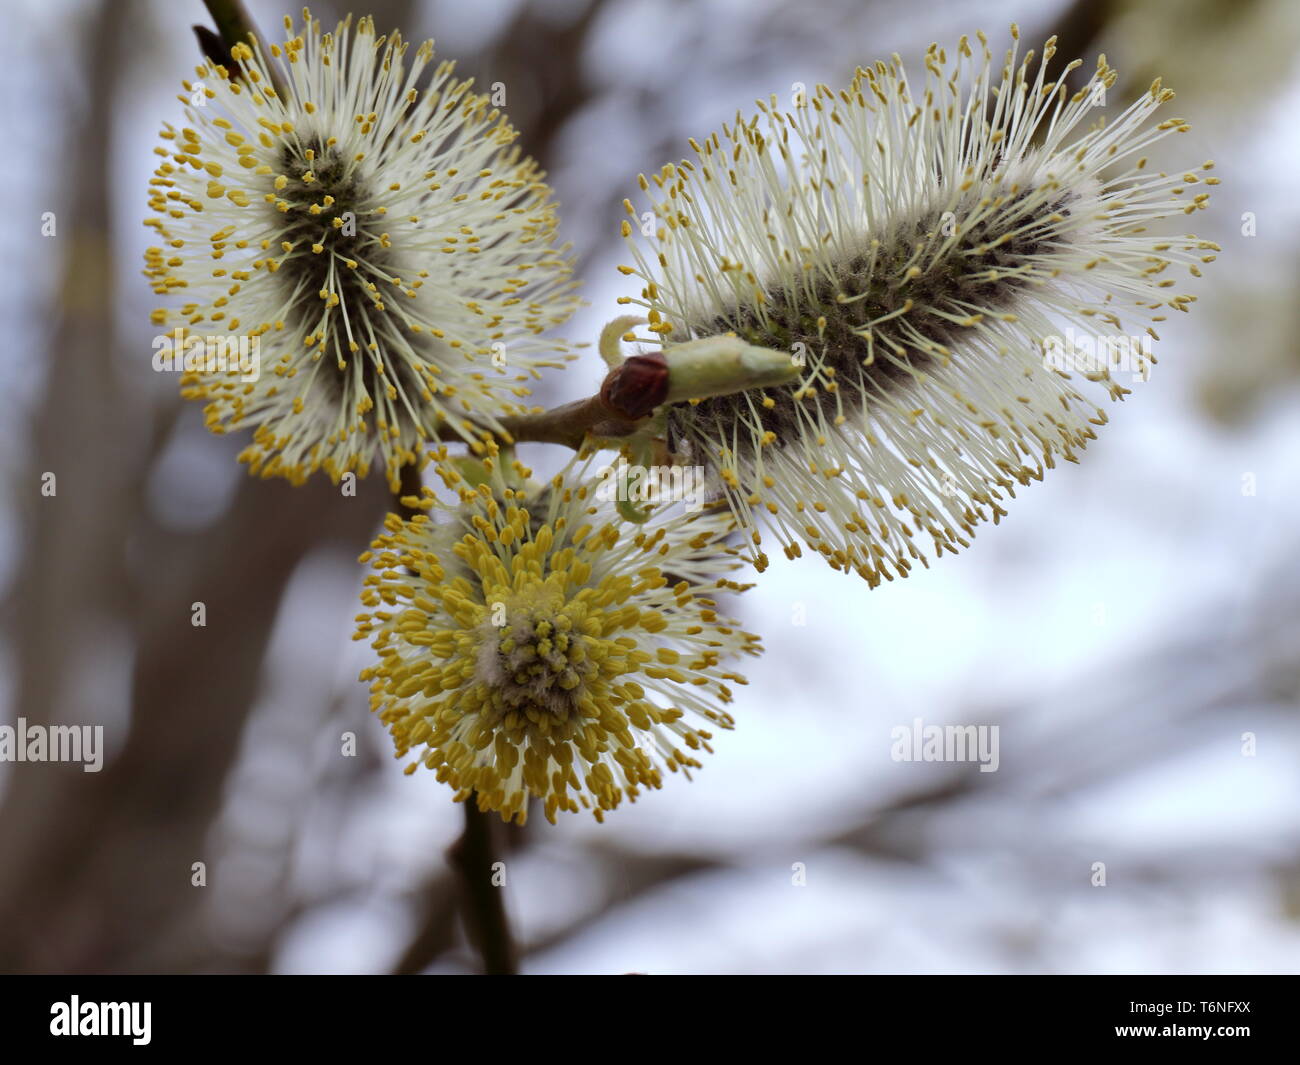 Salix alba. Salix acutifolia. Photo of inflorescence of willow in a cloudy spring day. Can be used for calendars or greeting cards. Good for designers Stock Photo